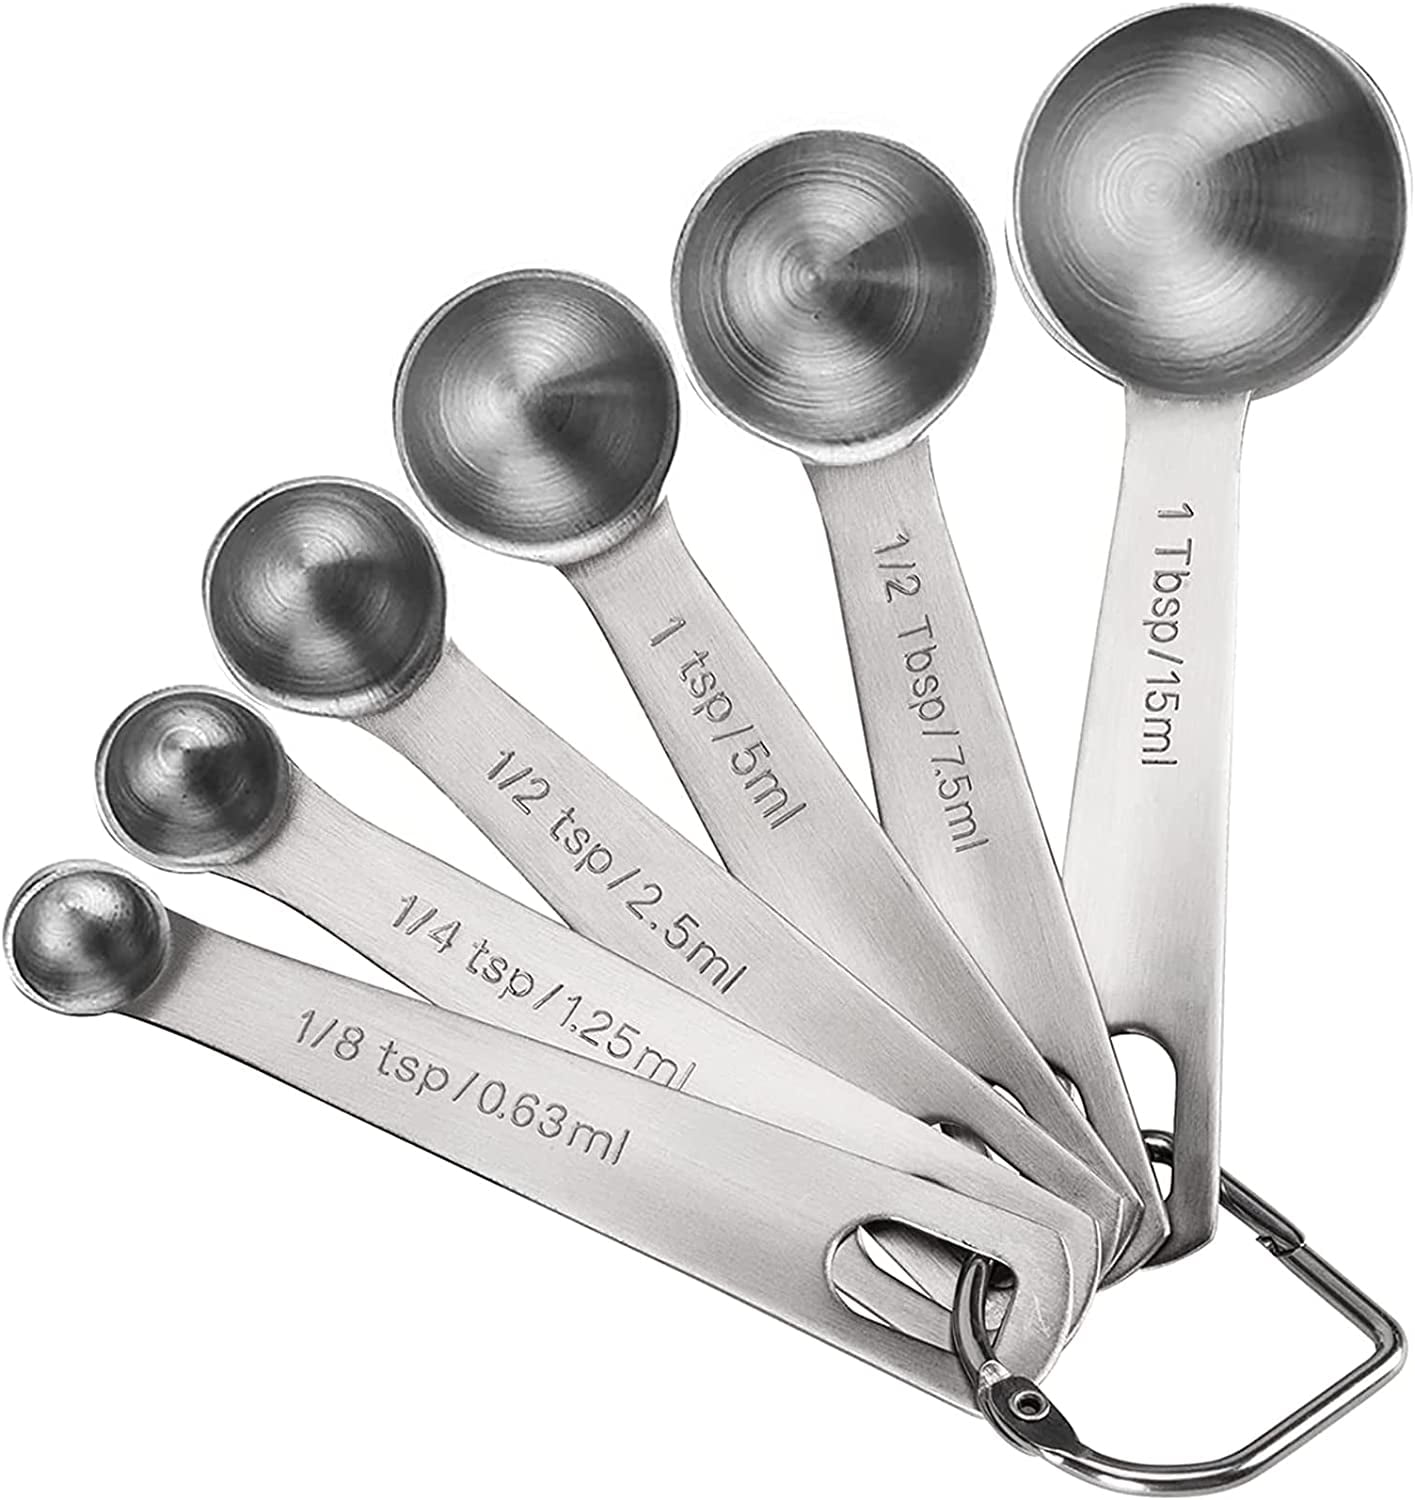 Gordo Boss Stainless Steel Measuring Cups And Spoons Set - Heavy Duty,  Metal Kitchen Measuring Set For